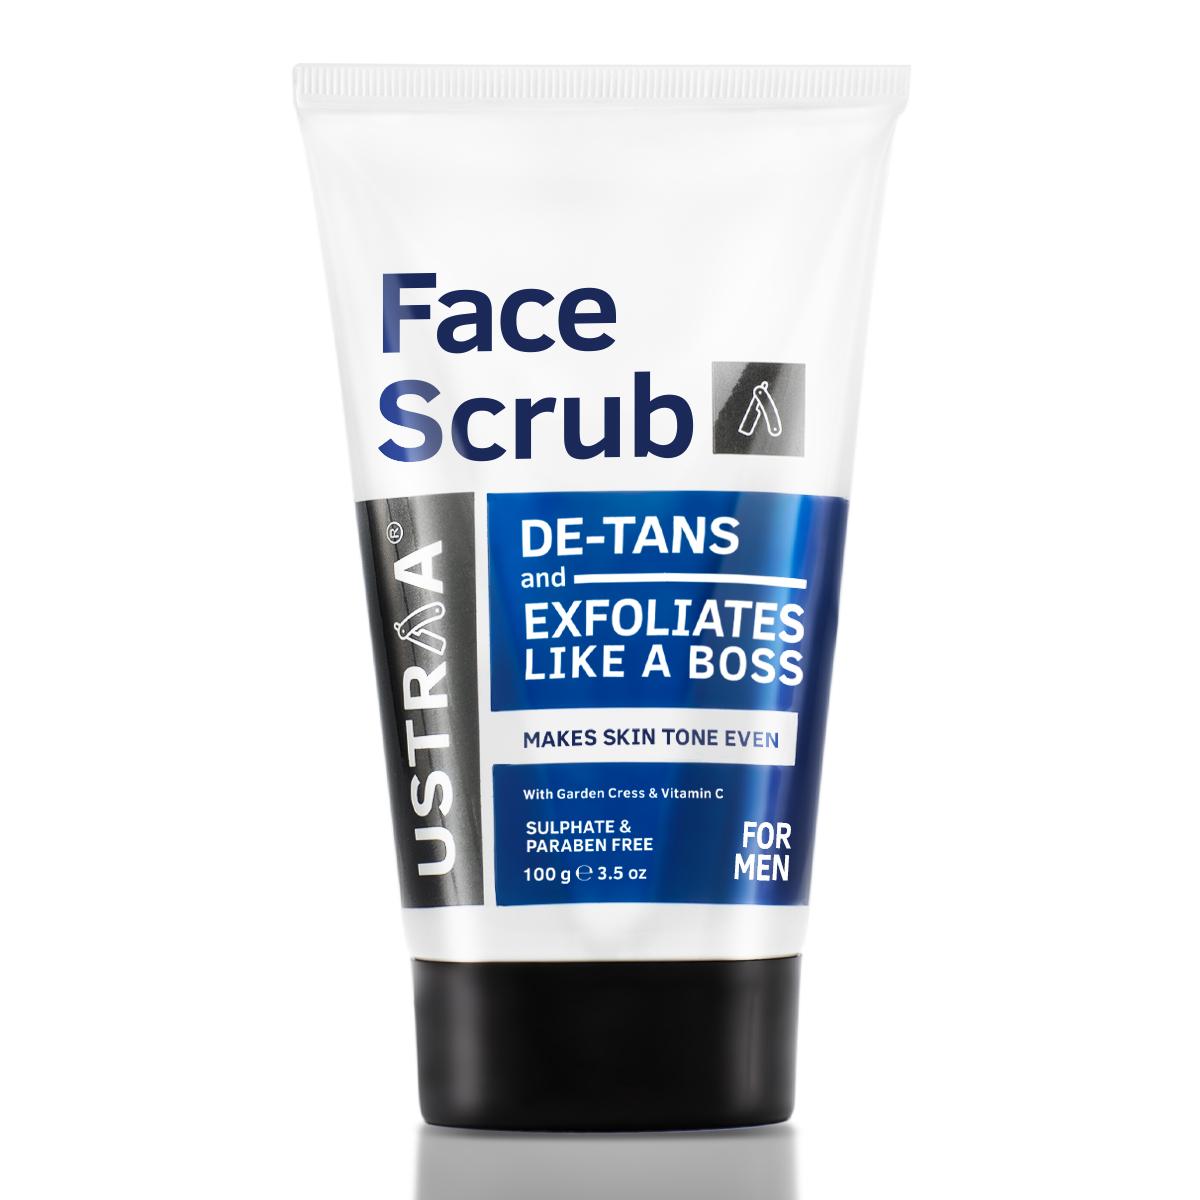 Ustraa De-Tan Face Scrub for Men, Dermatologically Tested, For Tan Removal & Even Skin Tone, For All Skin Types, Prevent Dark Spots, Without Bleach, No Sulphates, No Parabens,